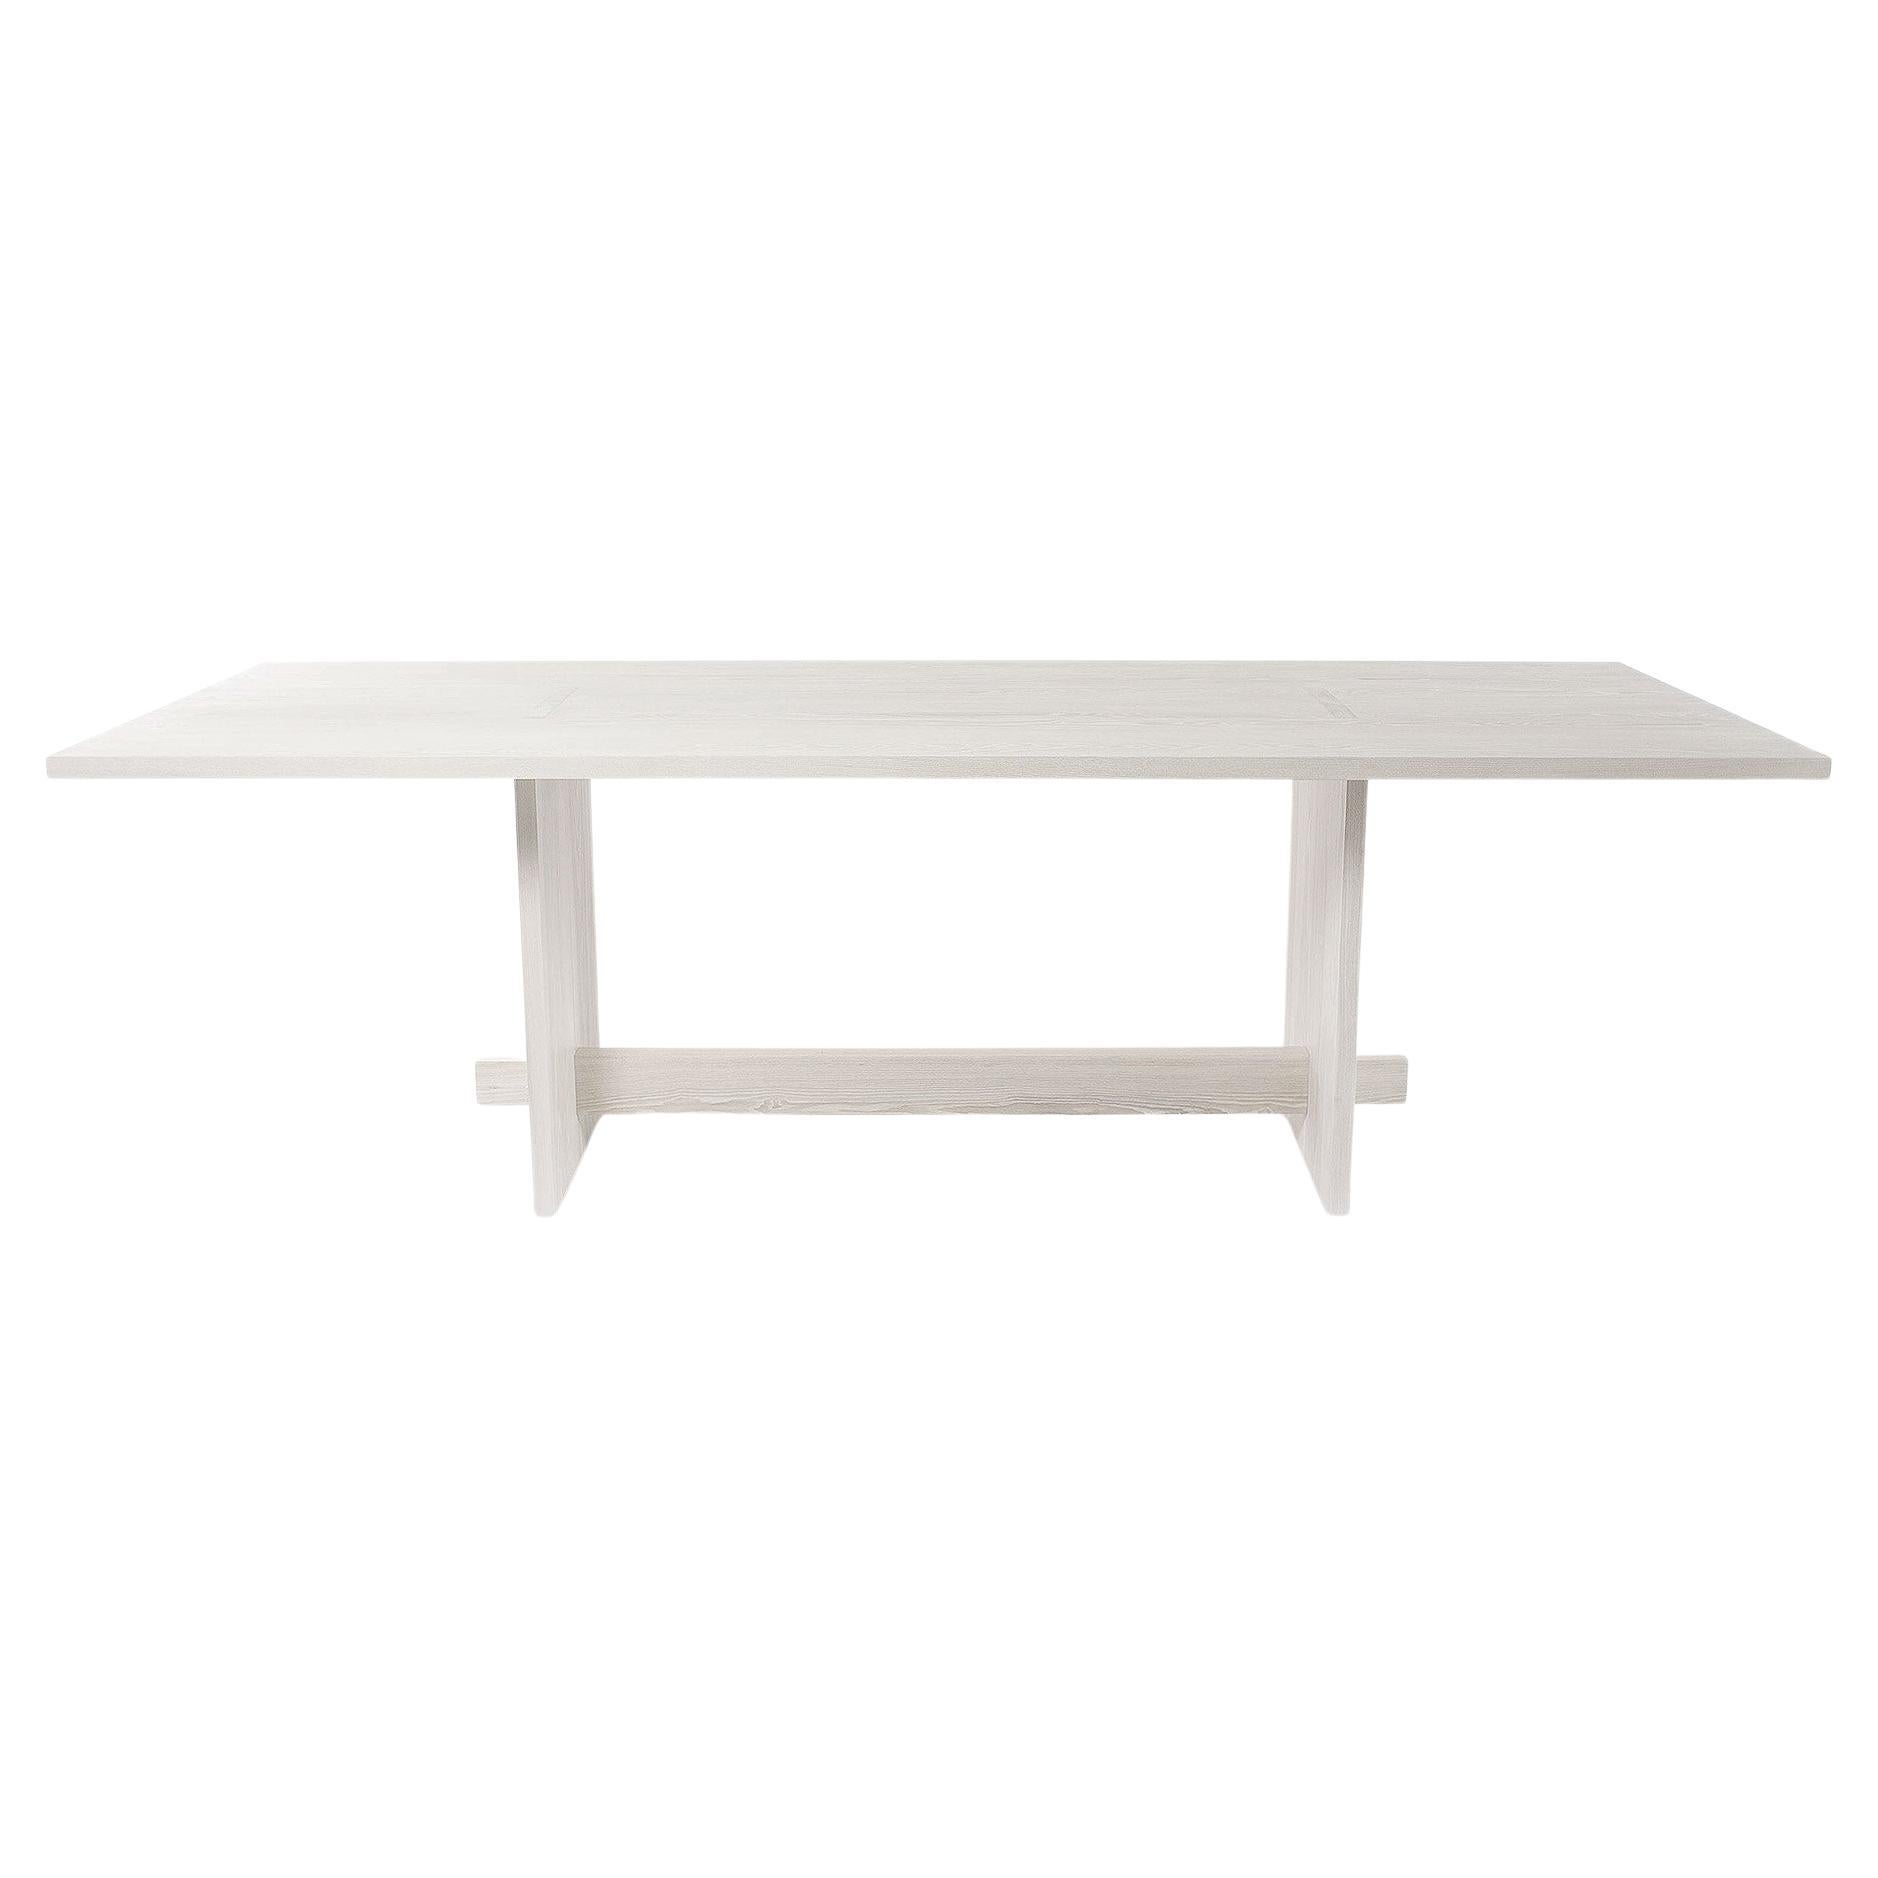 Handcrafted Solid White Ash Himes Dining Table 96"L by Mary Ratcliffe Studio For Sale